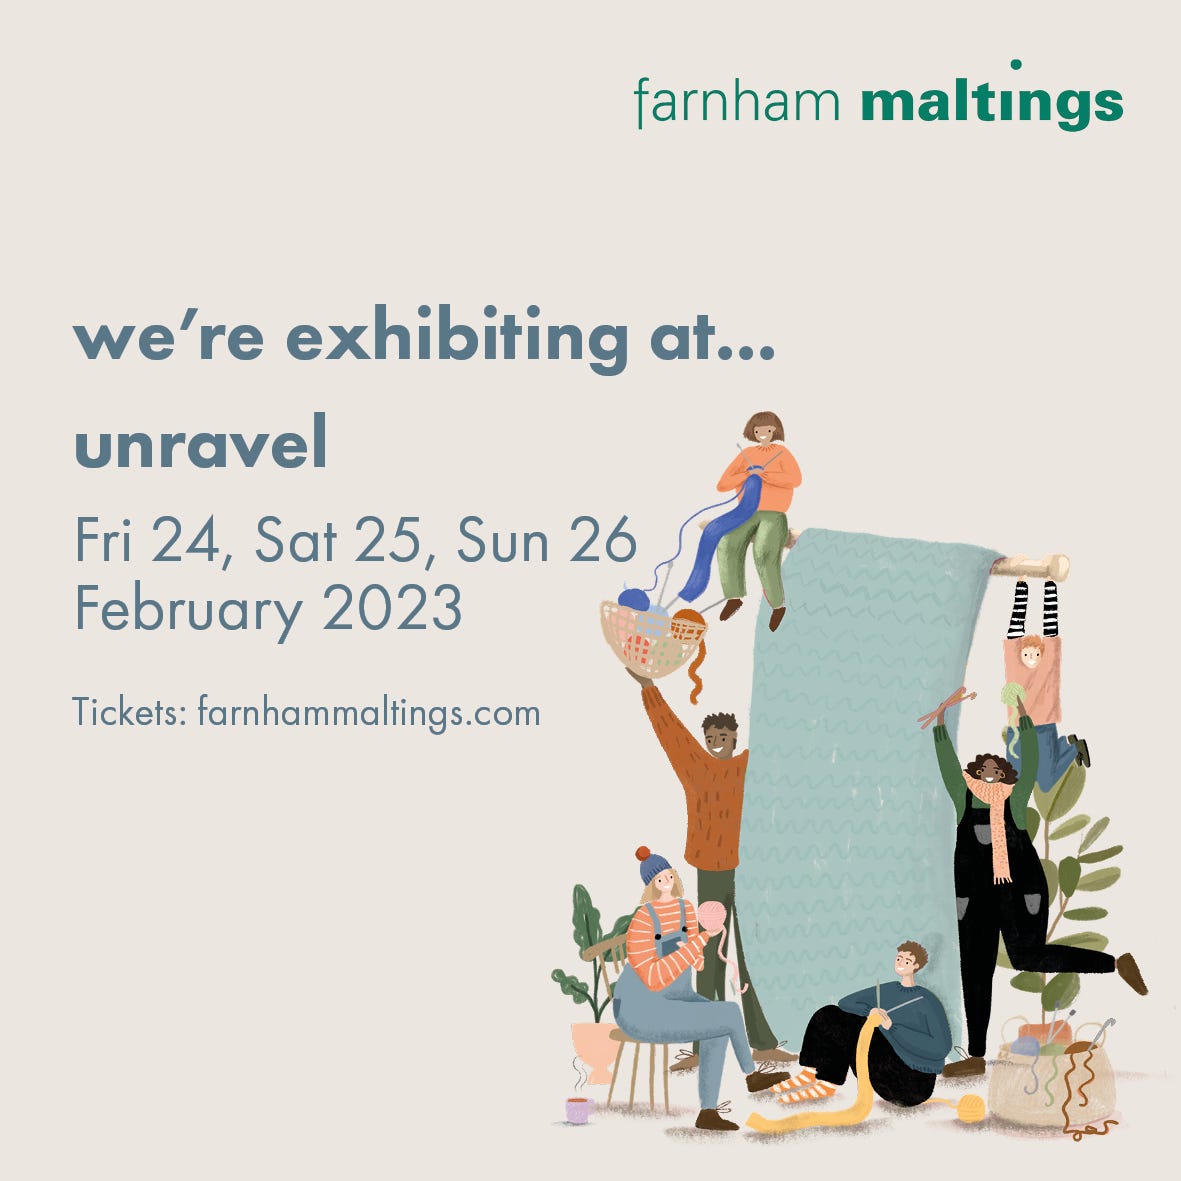 An illustration of six crafters dancing around a large blue piece of knitting, with several of them holding projects or balls of yarn. The text reads "we're exhibiting at...unravel. Friday 24, Saturday 25 Sunday 26 February 2023. Tickets: farnhammaltings.com